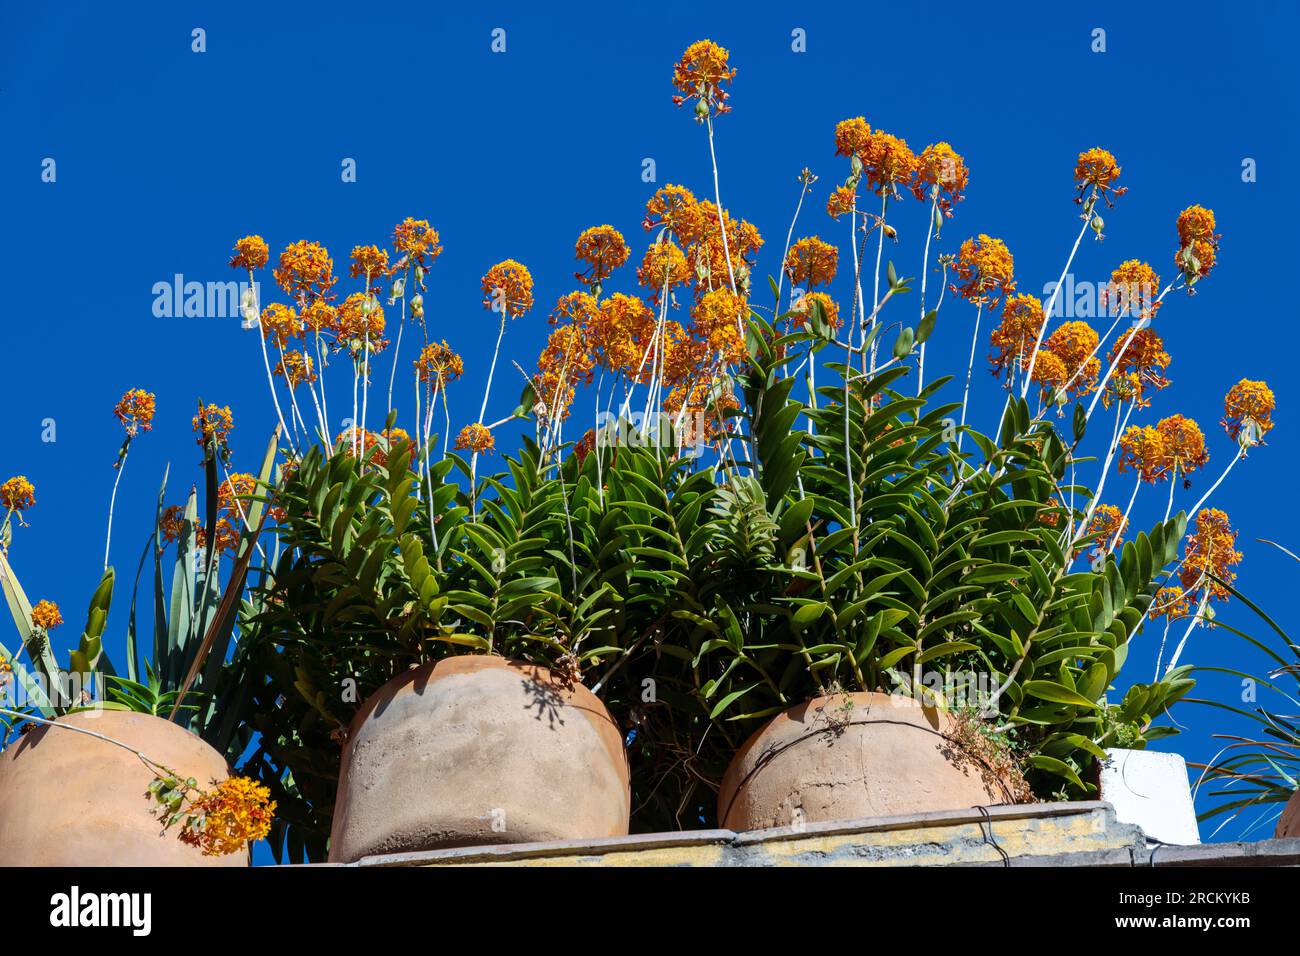 Colorful orange flowers bloom against the deep blue sky on a rooftop garden of a private home in the historic district in San Miguel de Allende, GTO, Mexico. Stock Photo